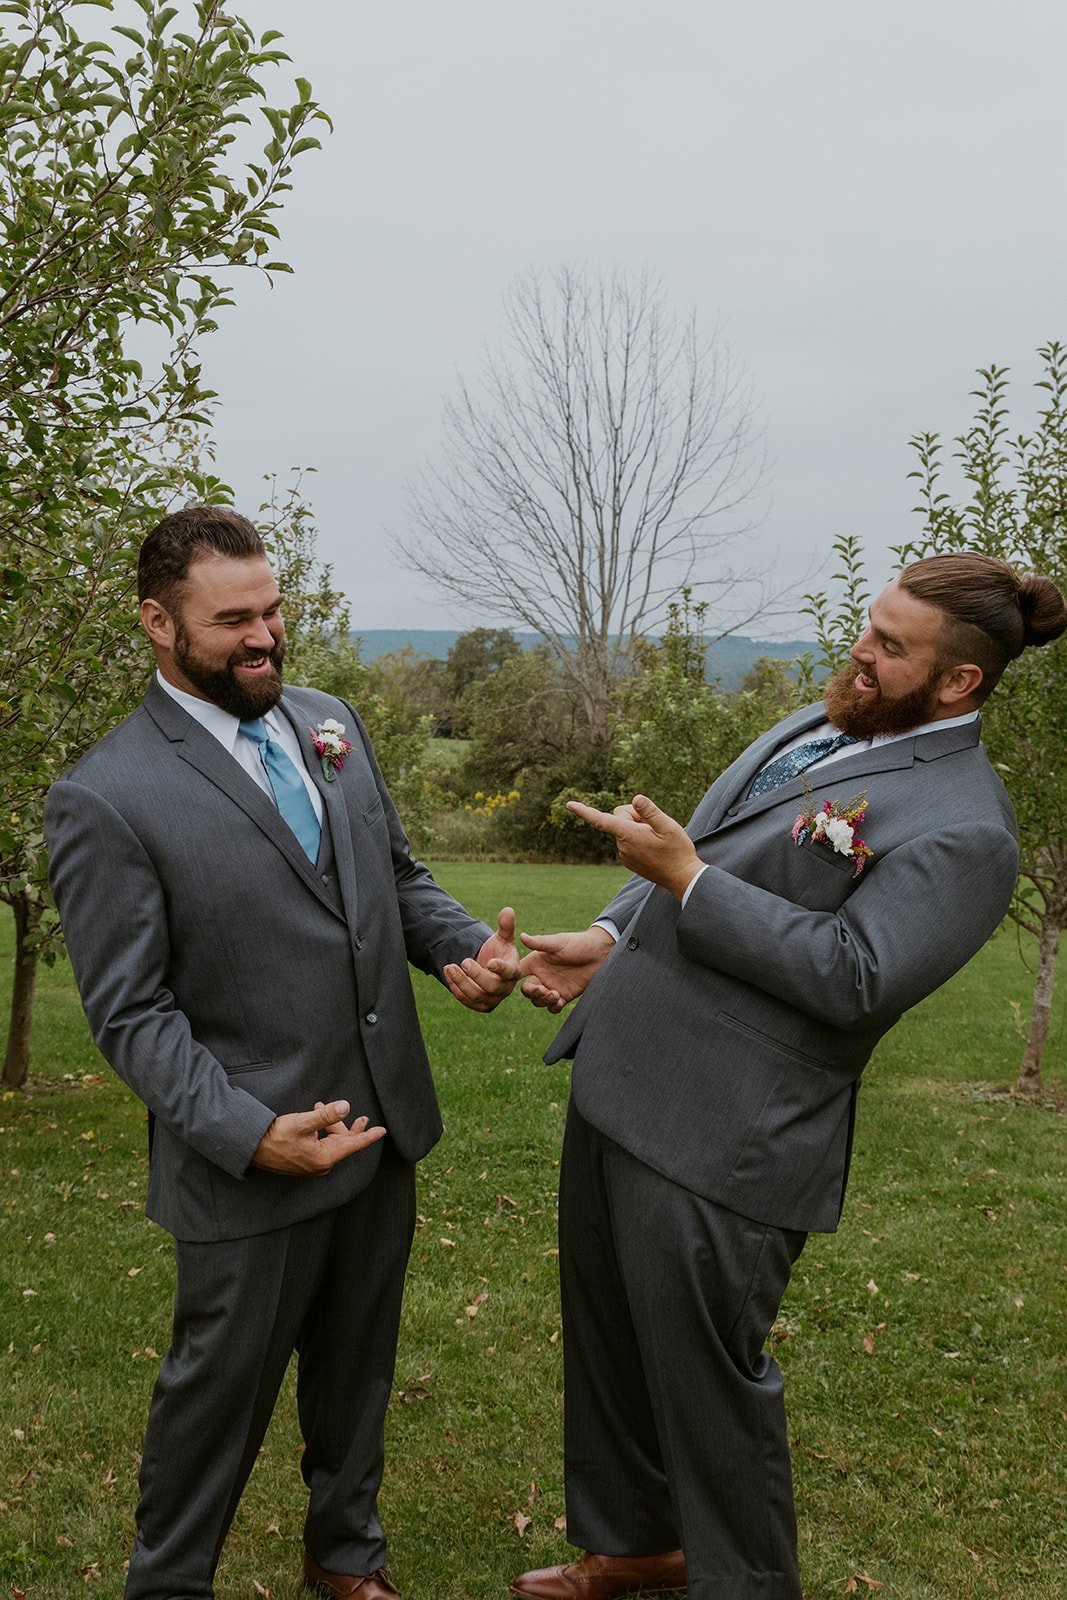 The groom and his best man laughing with one another.